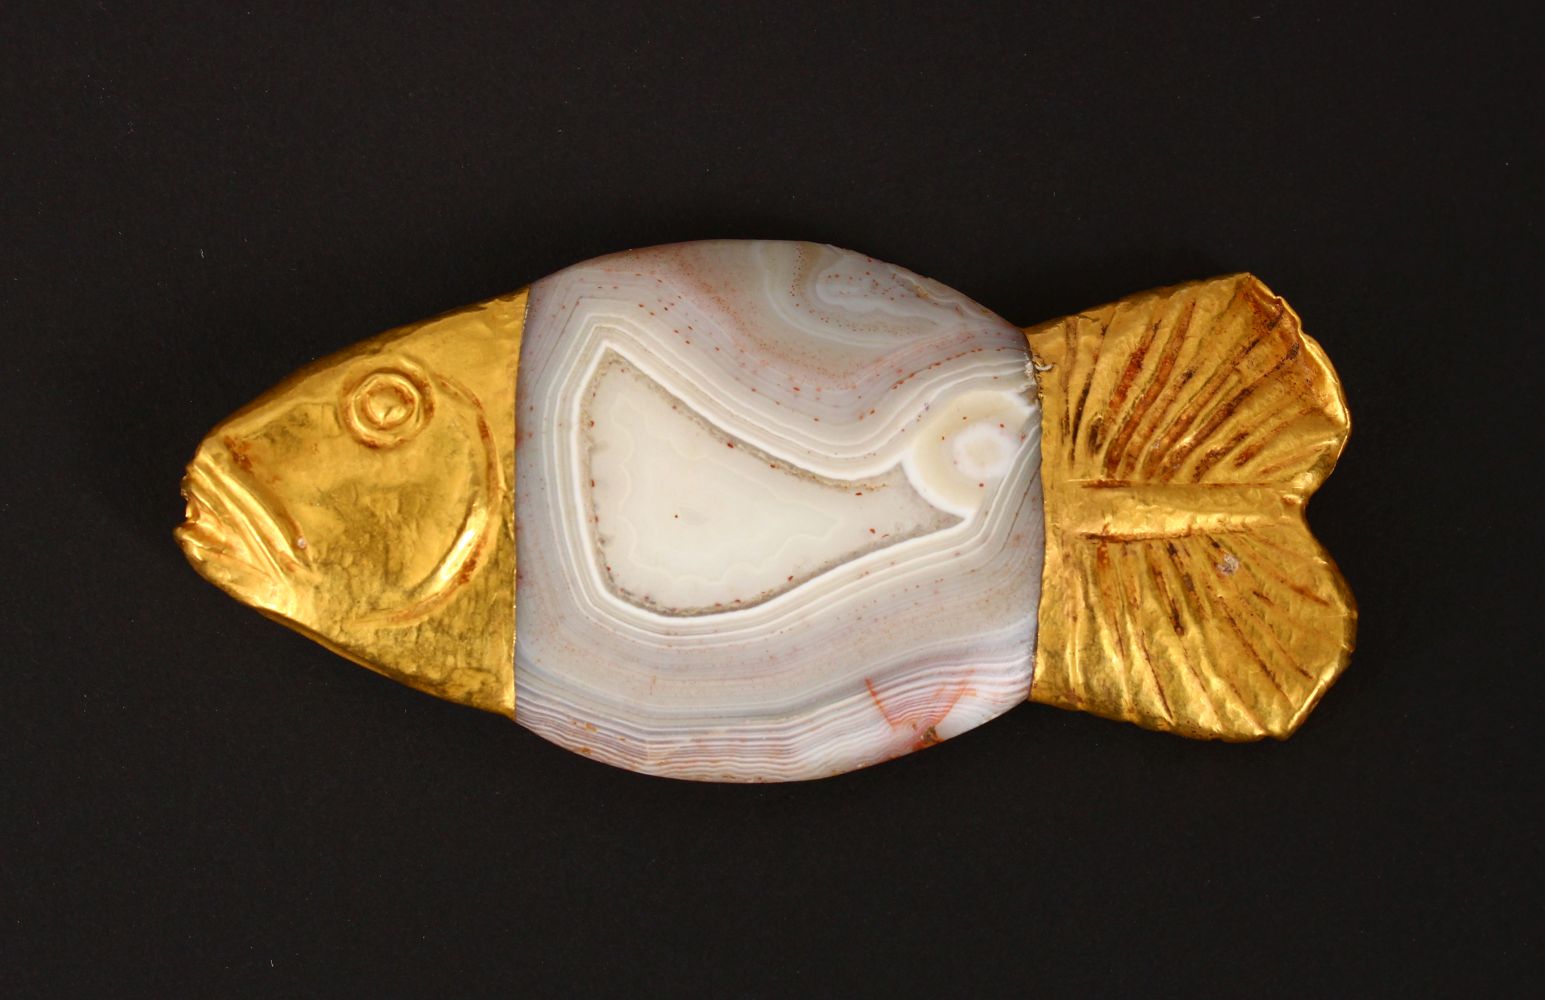 A GOOD EARLY BATAVIAN HIGH CARAT GOLD AND AGATE PENDANT IN THE FORM OF A FISH, 9cm x 4cm - Image 5 of 8